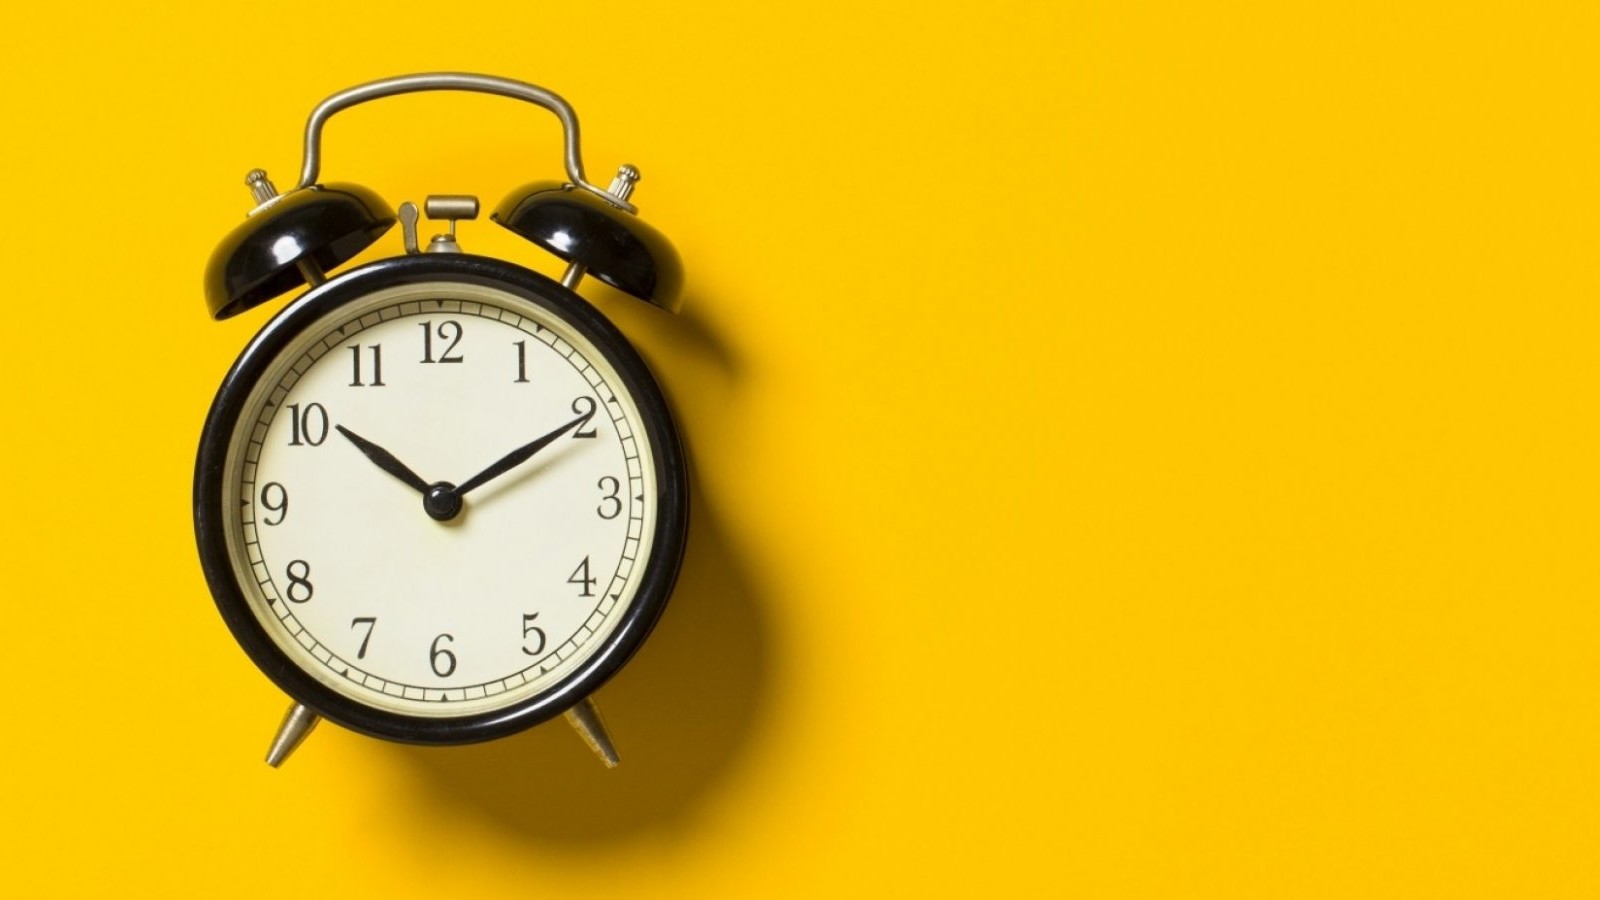 An image of an old-fashioned alarm clock on a yellow background